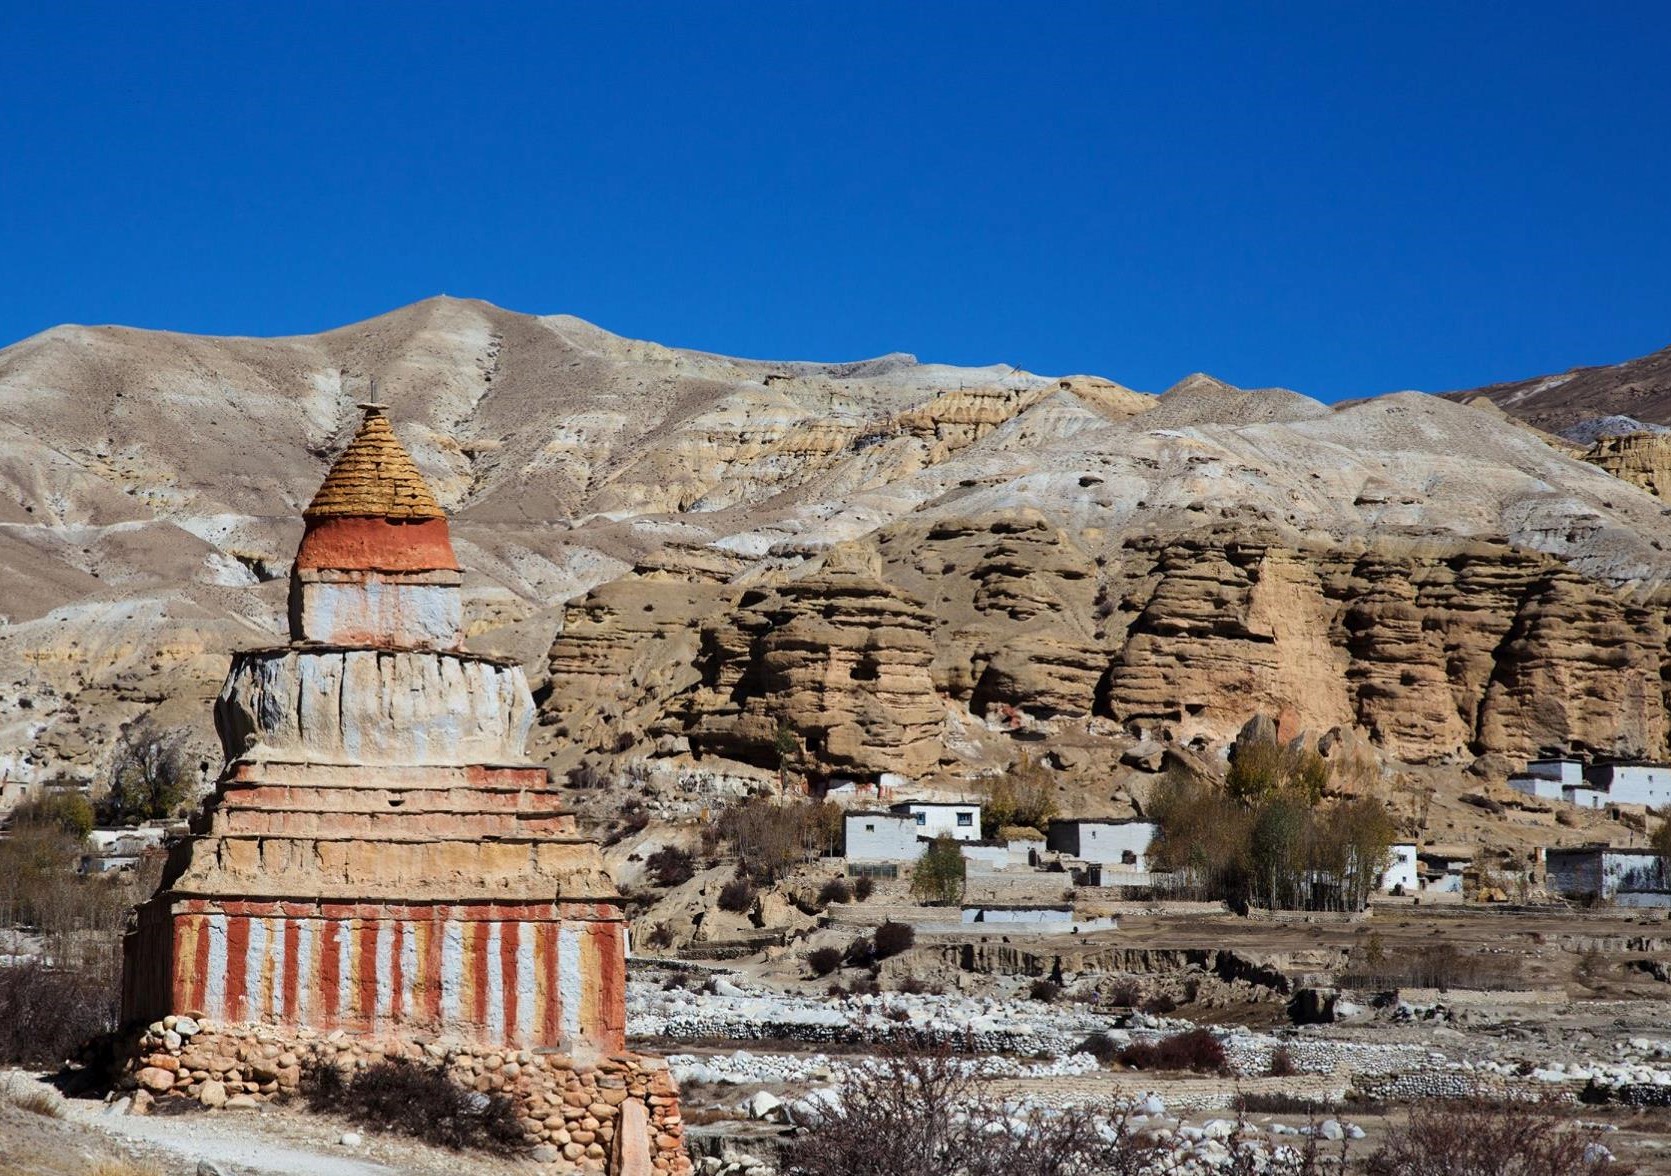 Upper Mustang Jeep Tour